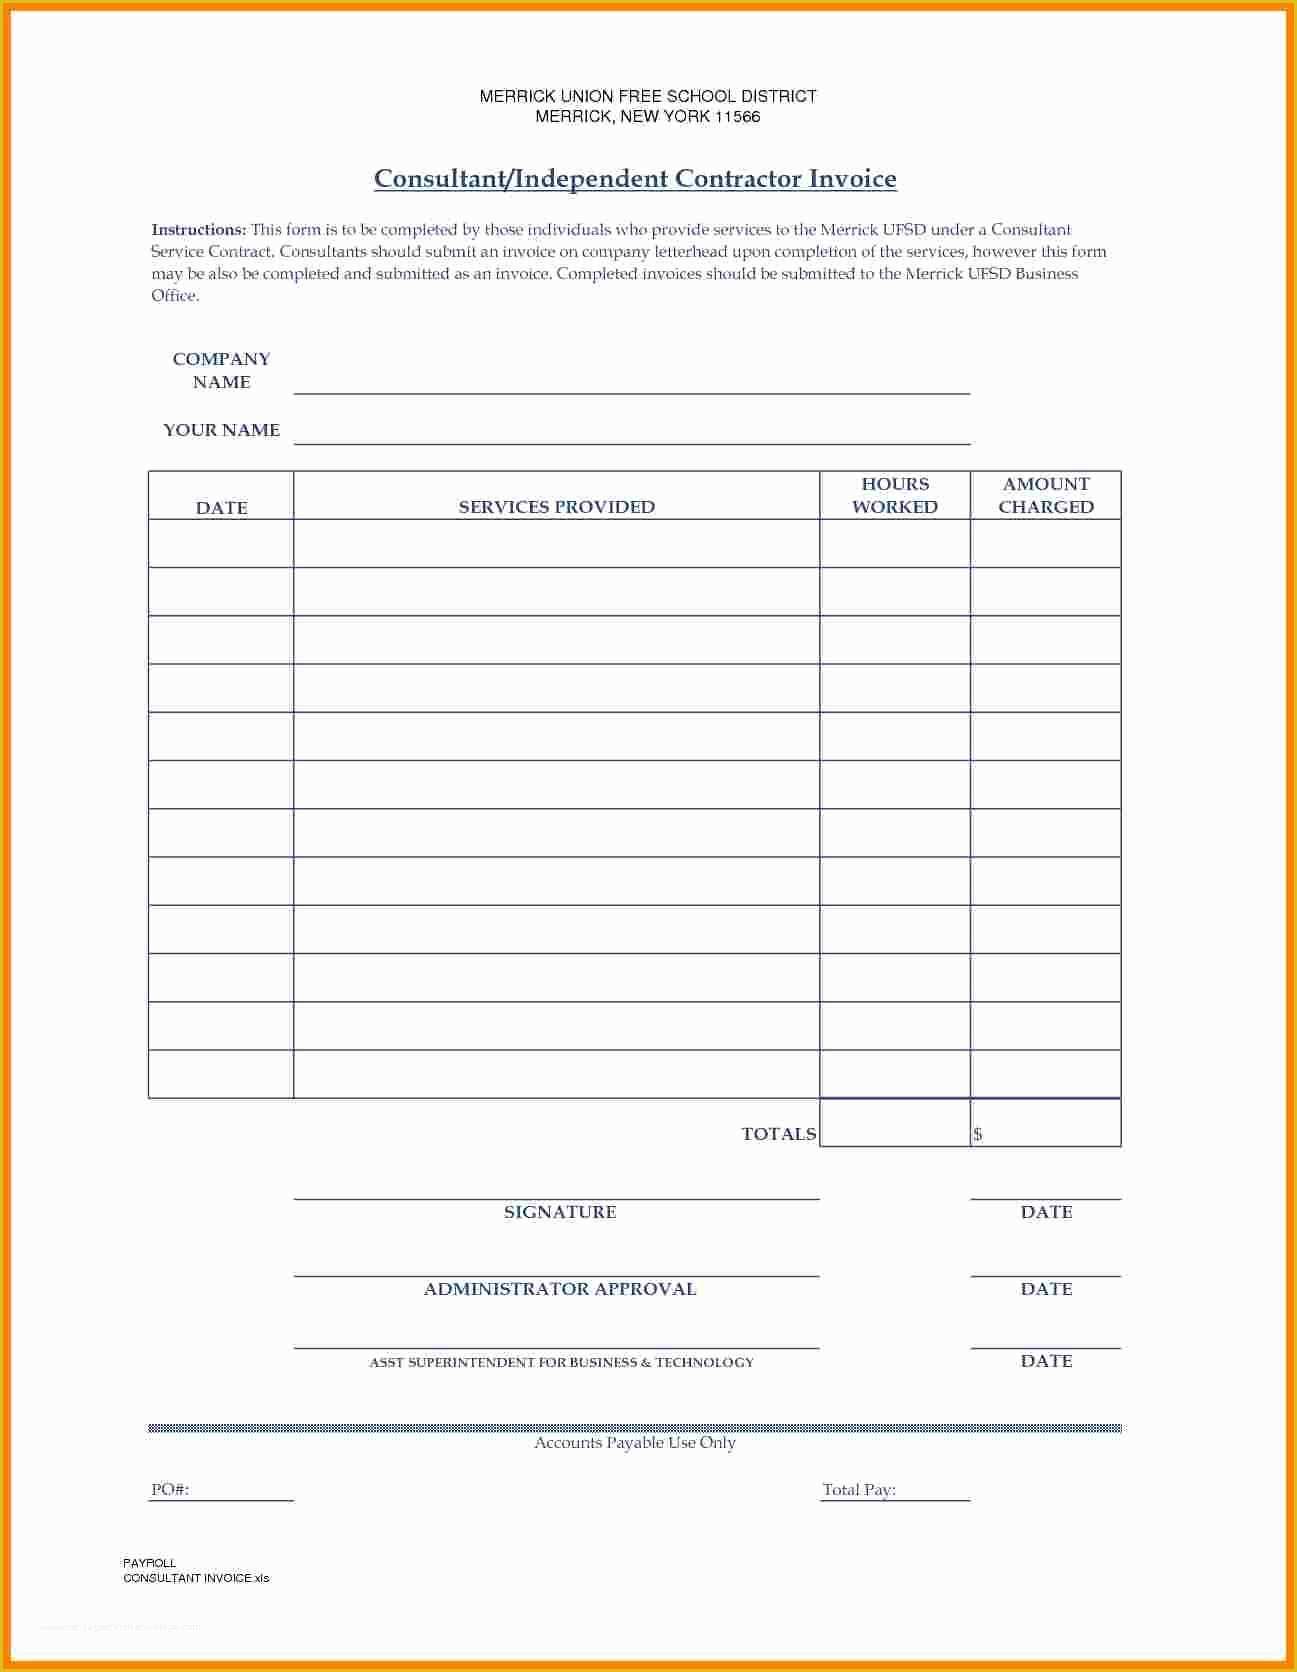 Independent Contractor Invoice Template Free Of 7 Independent Contractor Invoice